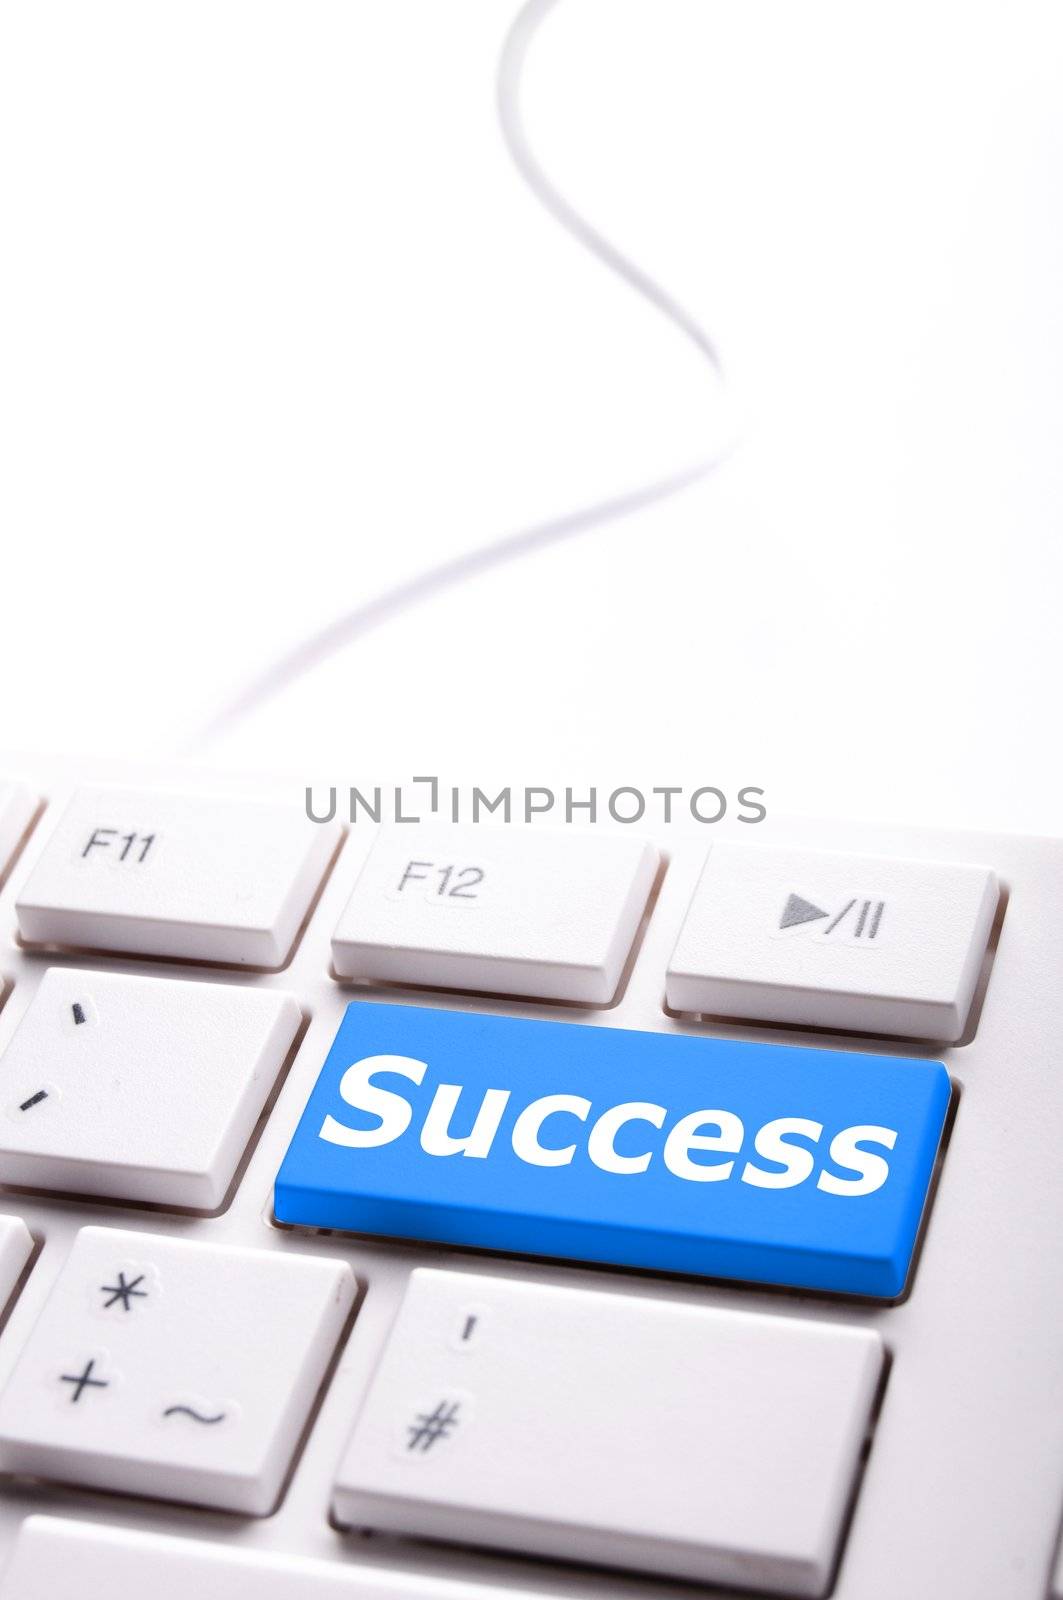 success word on button or key showing motivation for job or business